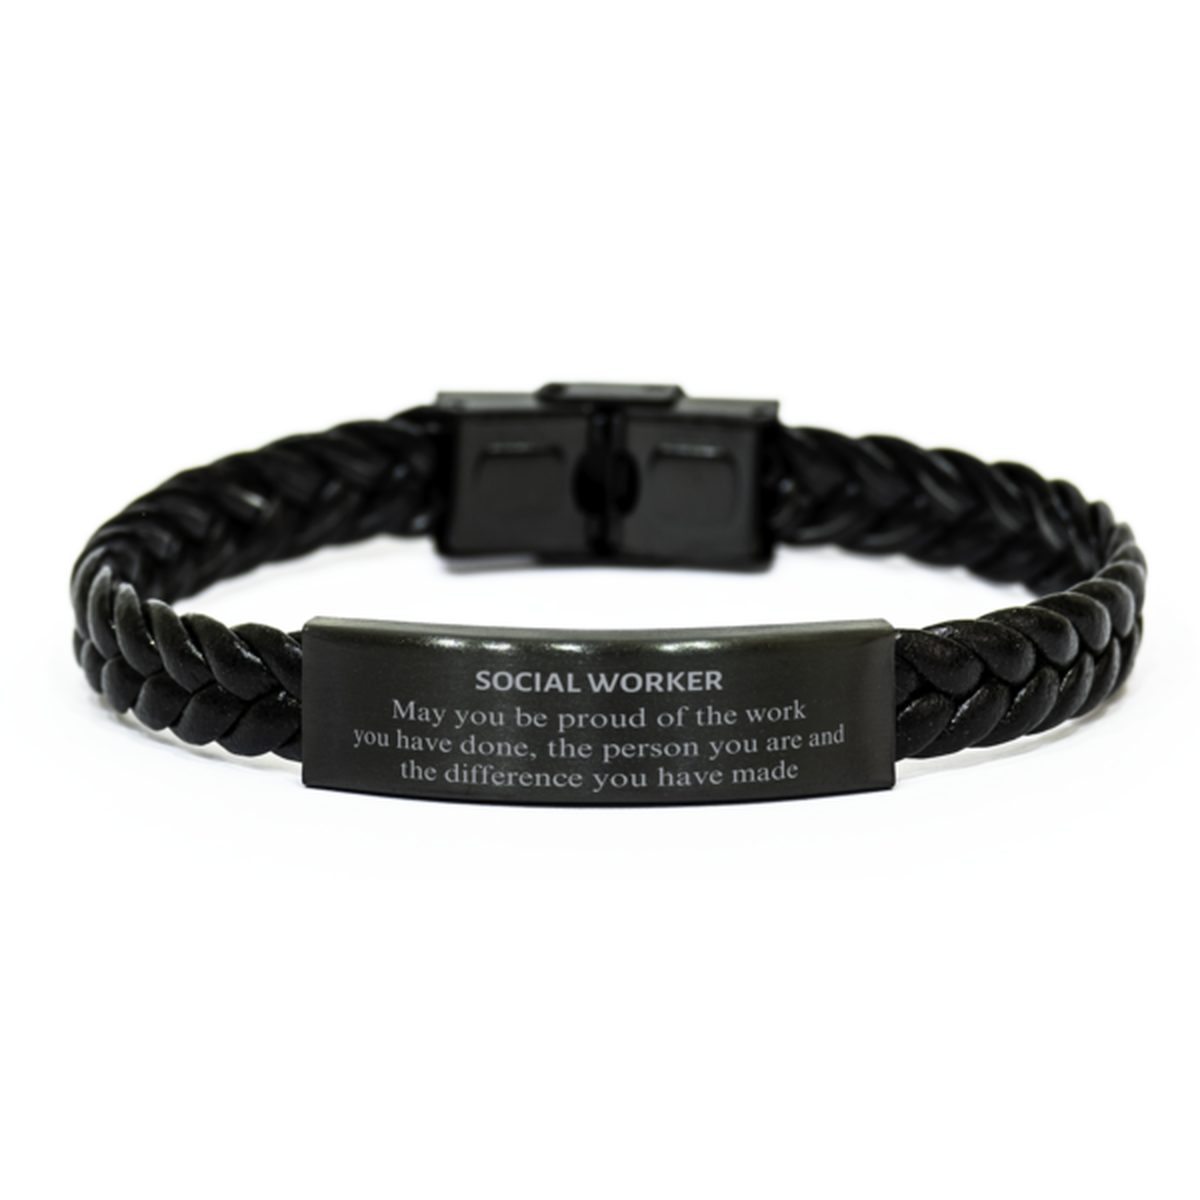 Social Worker May you be proud of the work you have done, Retirement Social Worker Braided Leather Bracelet for Colleague Appreciation Gifts Amazing for Social Worker